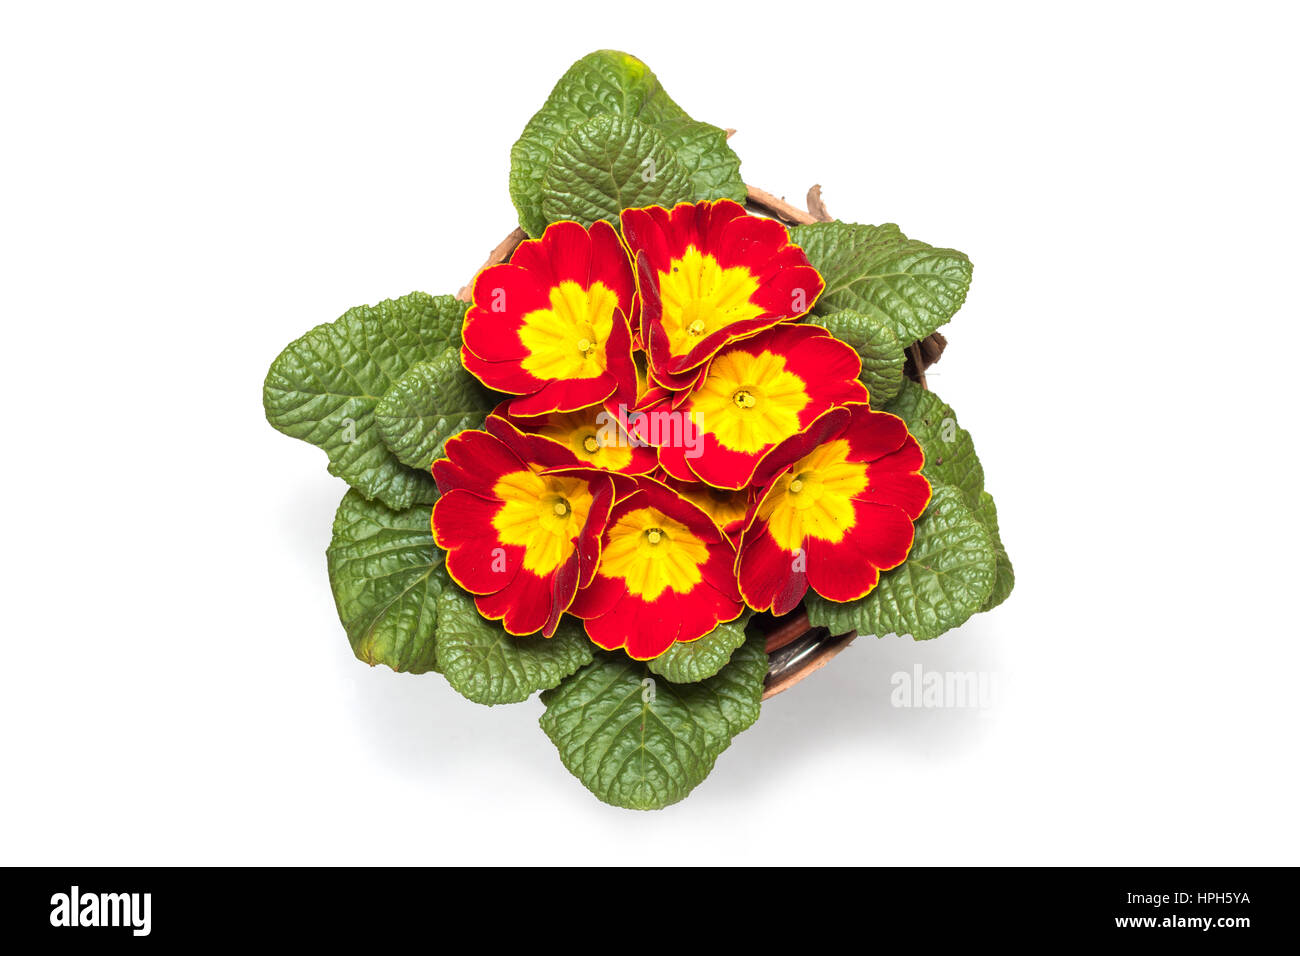 top view from branch of yellow and red flowers with leafs turning yellow isolated in white background Stock Photo